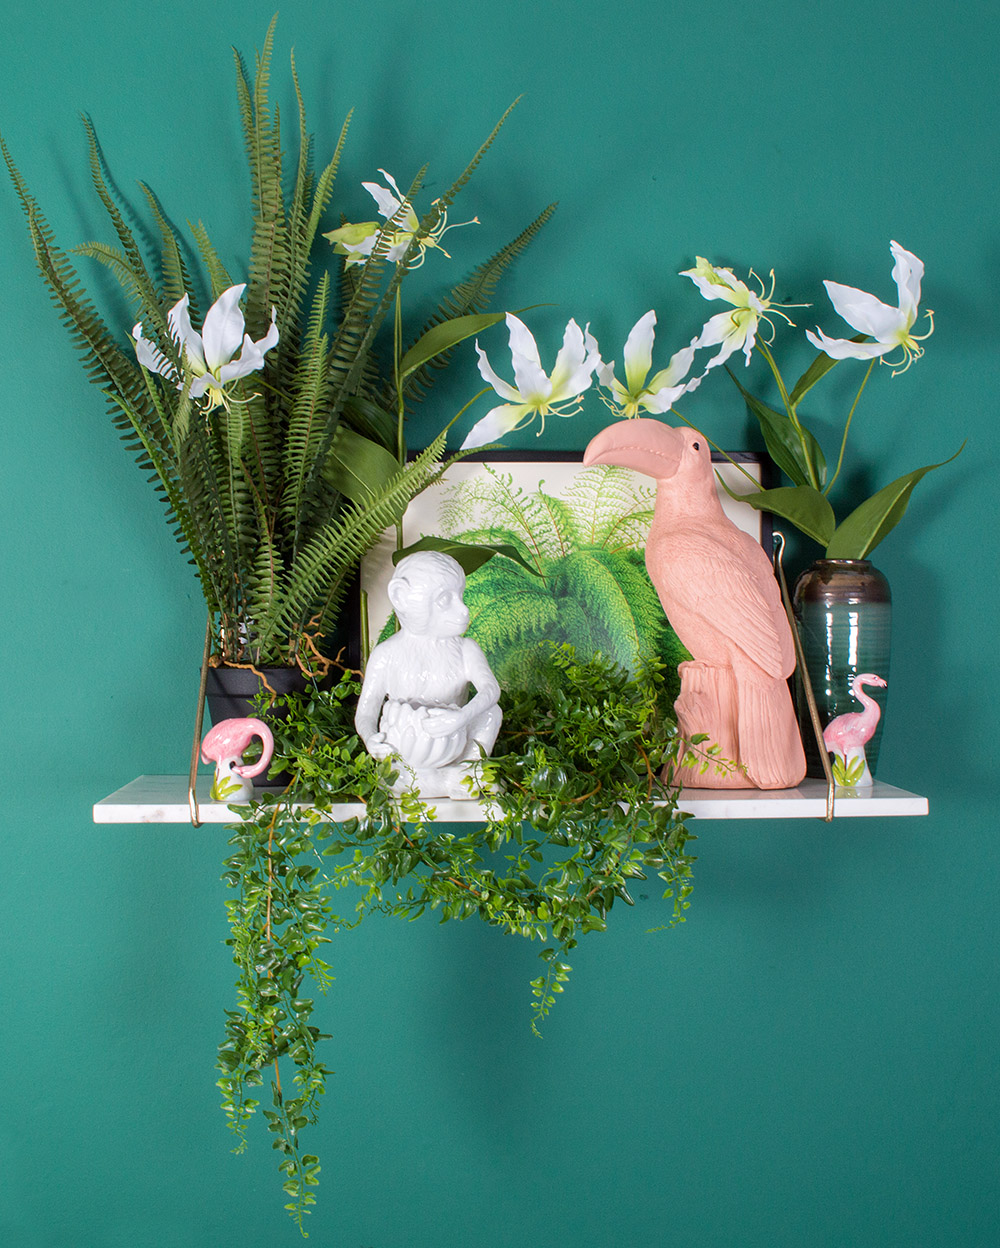 A bit of tropical and a bit of whimsy all snuggled up together creates a white marble shelf that has the look of a Victorian collector’s display. Curios from around the world come together for a touch of the exotic, with a pink toucan money box, a cheeky monkey plant pot and some flamingos for a laugh. Lots of lush faux greenery and lily flowers completes the look.